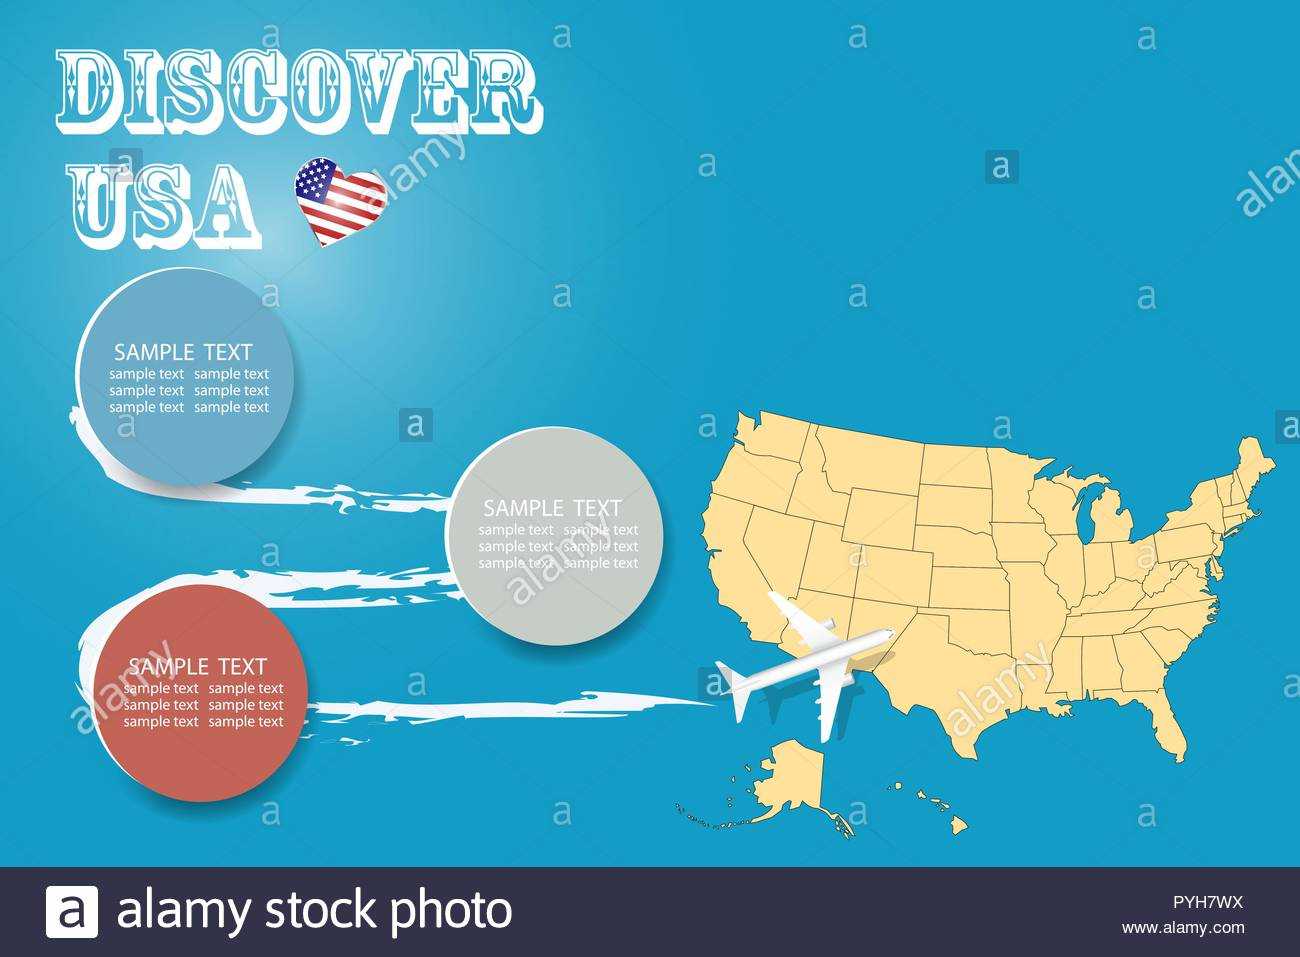 Discover Usa Blank Template With An Airplane Flying To The Pertaining To Blank Template Of The United States